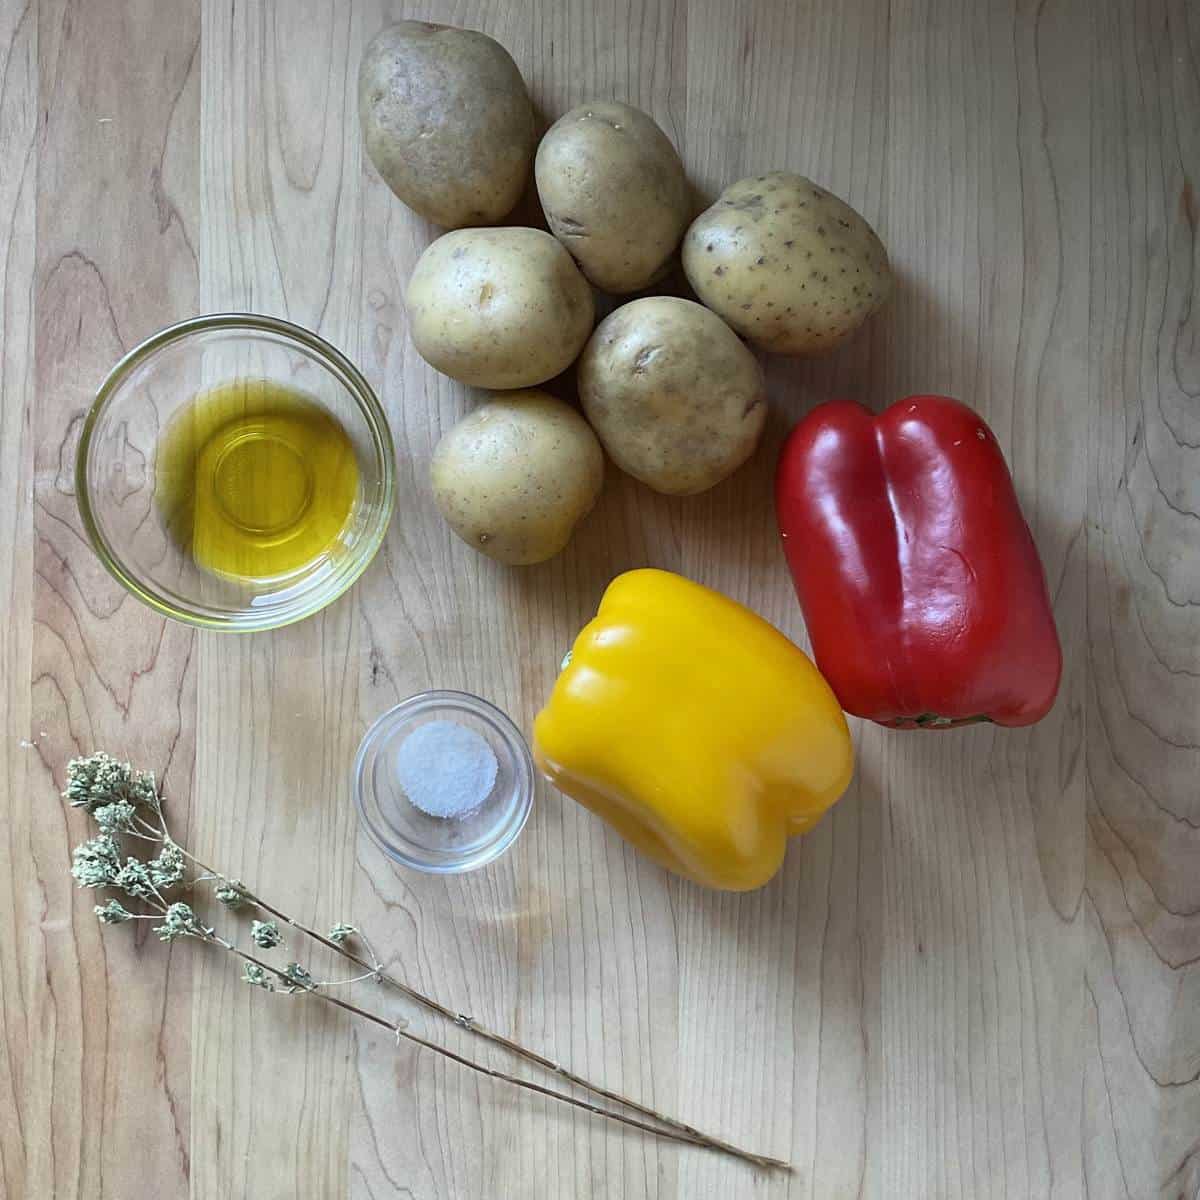 Ingredients to make pipi e patate on a wooden table.